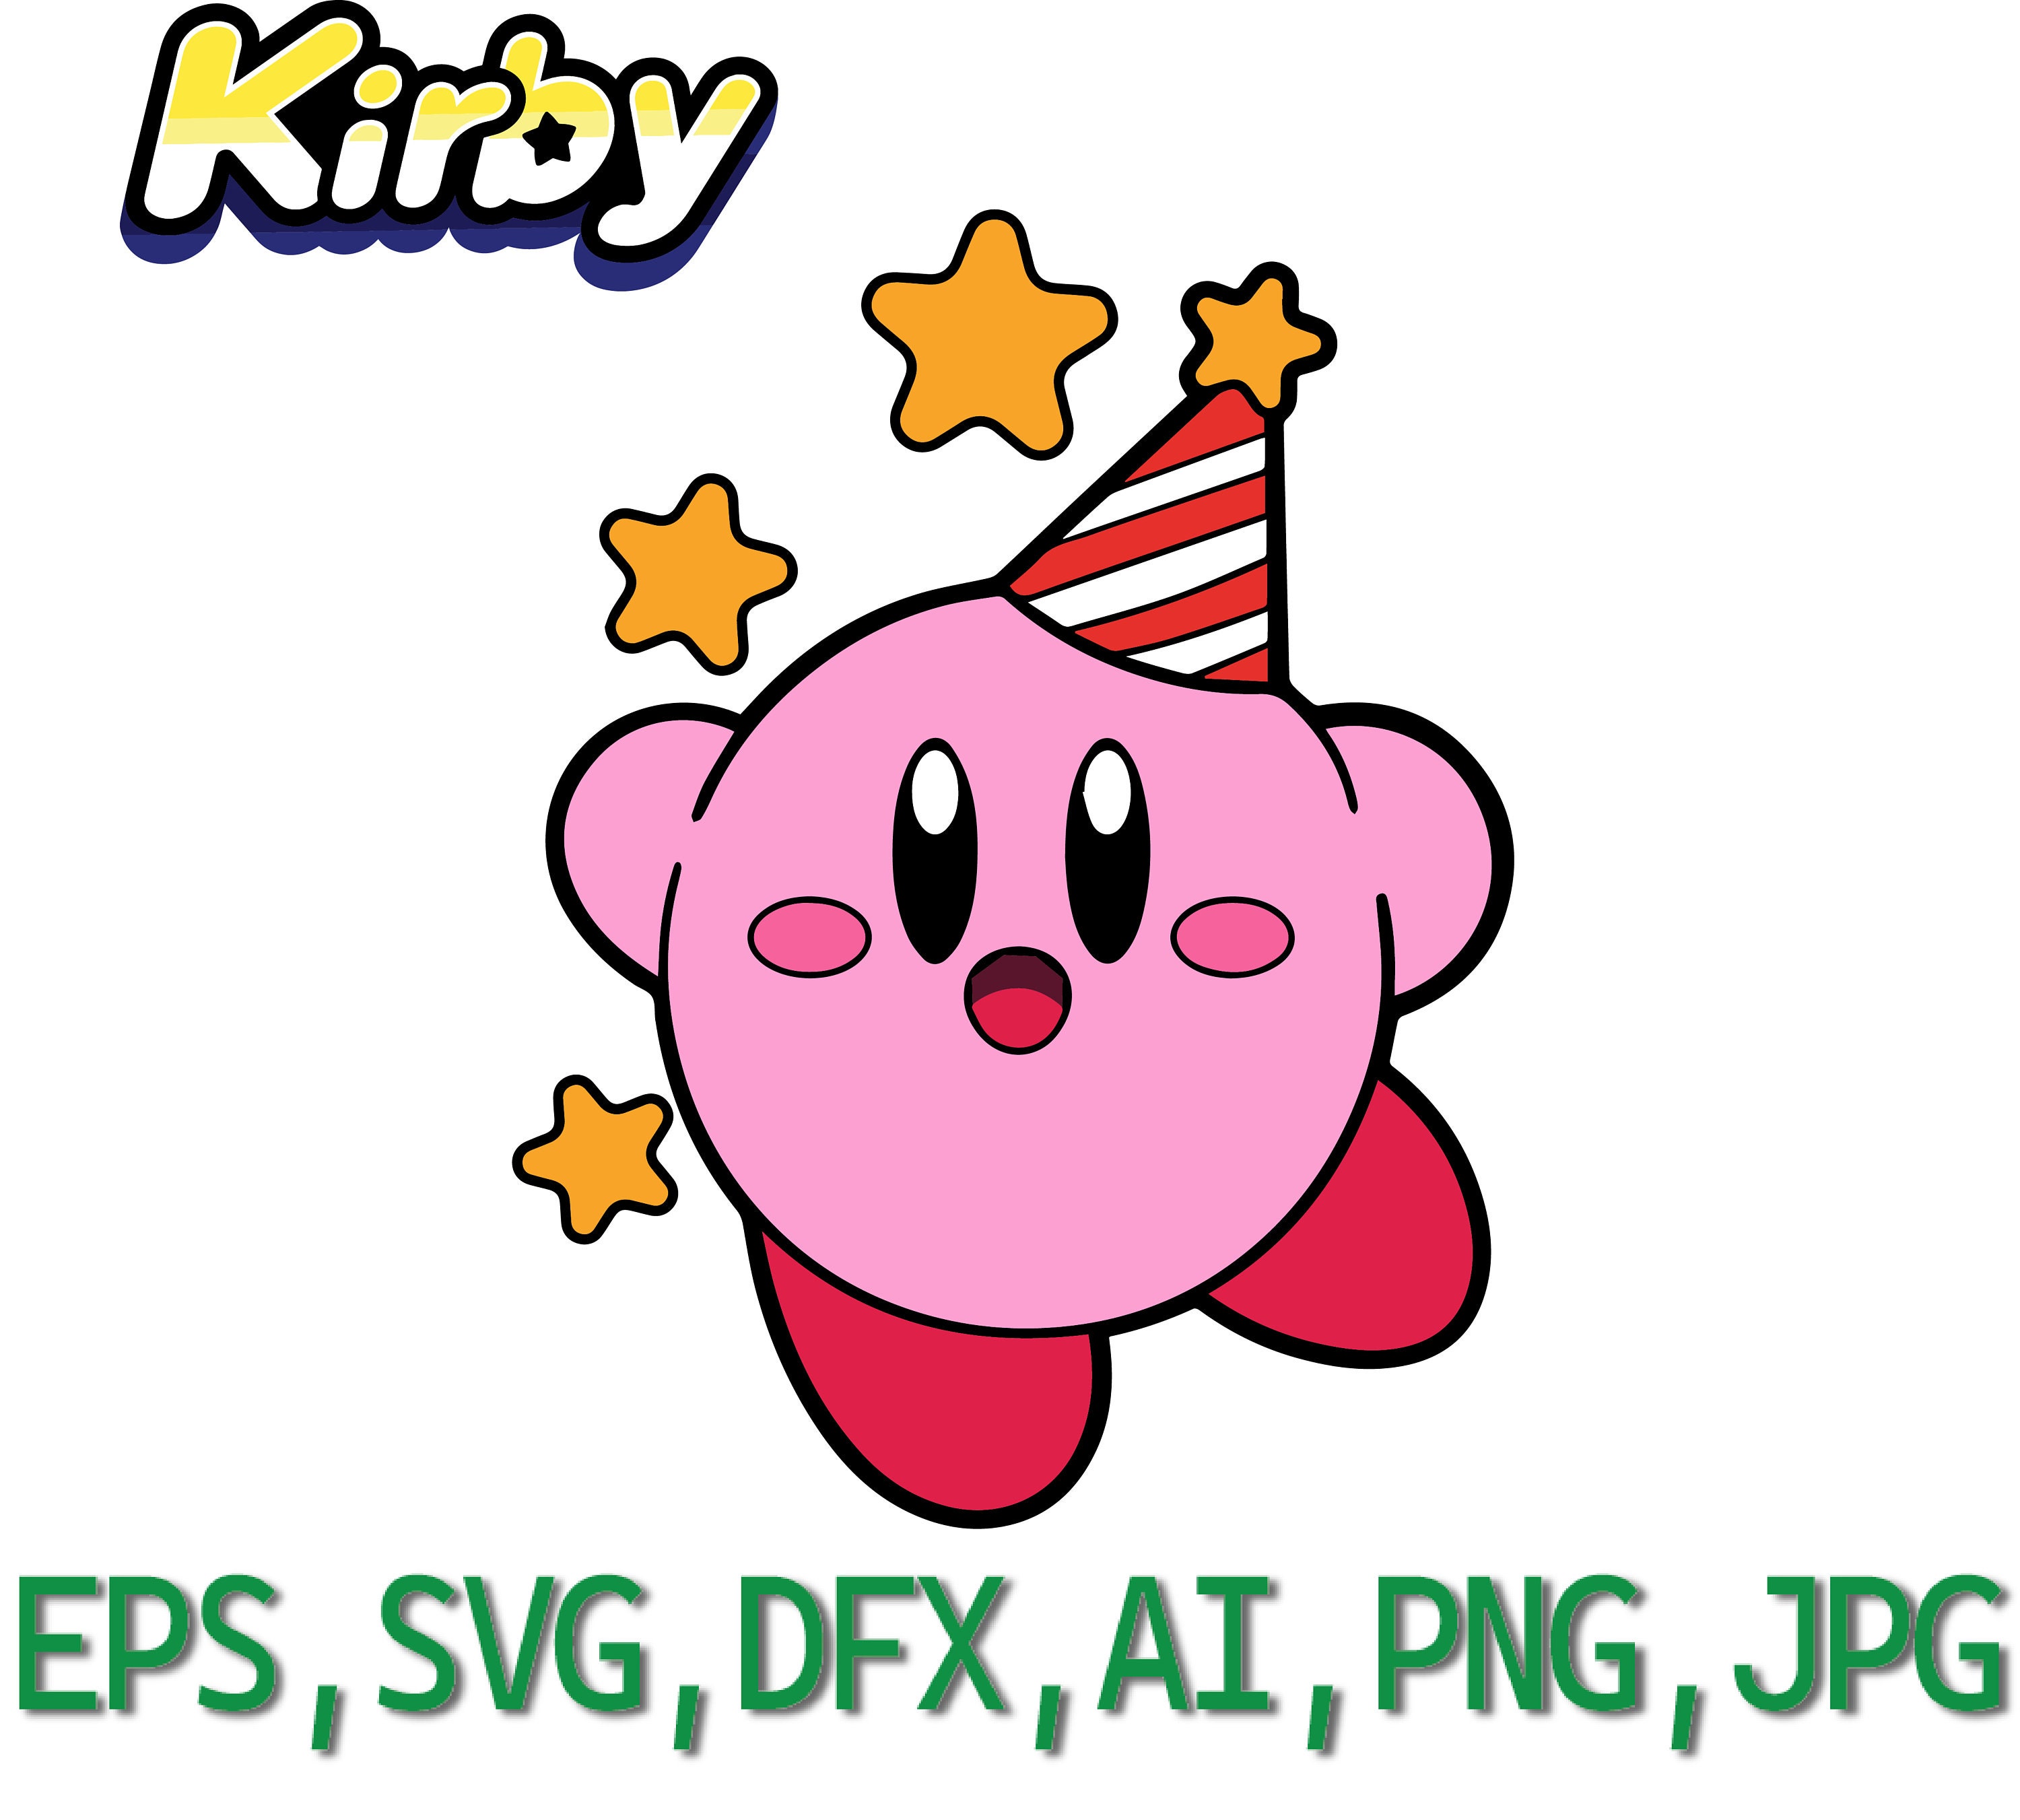 Kirby SVG DXF EPS Png Illustrator